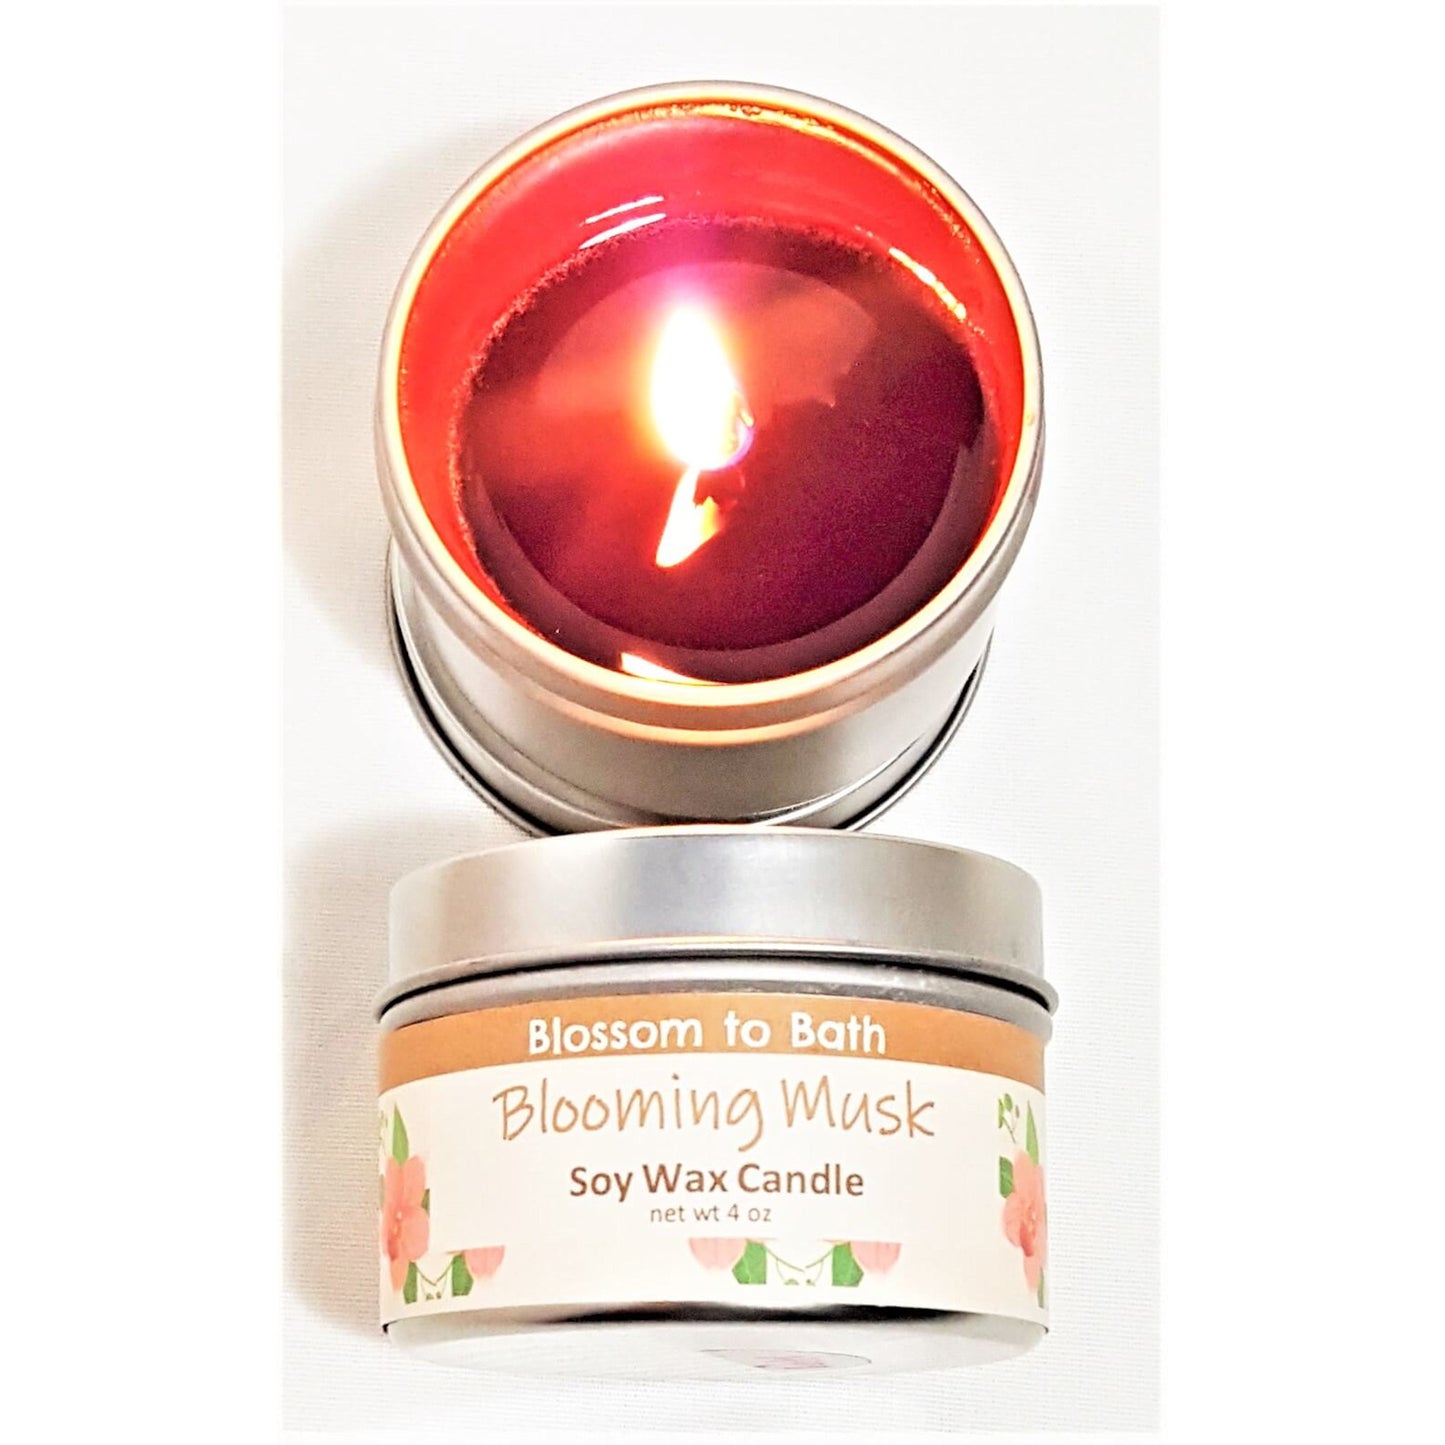 Buy Blossom to Bath Blooming Musk Soy Wax Candle from Flowersong Soap Studio.  Fill the air with a charming fragrance that lasts for hours  A sensual floral and musk scent that is subtle and feminine.